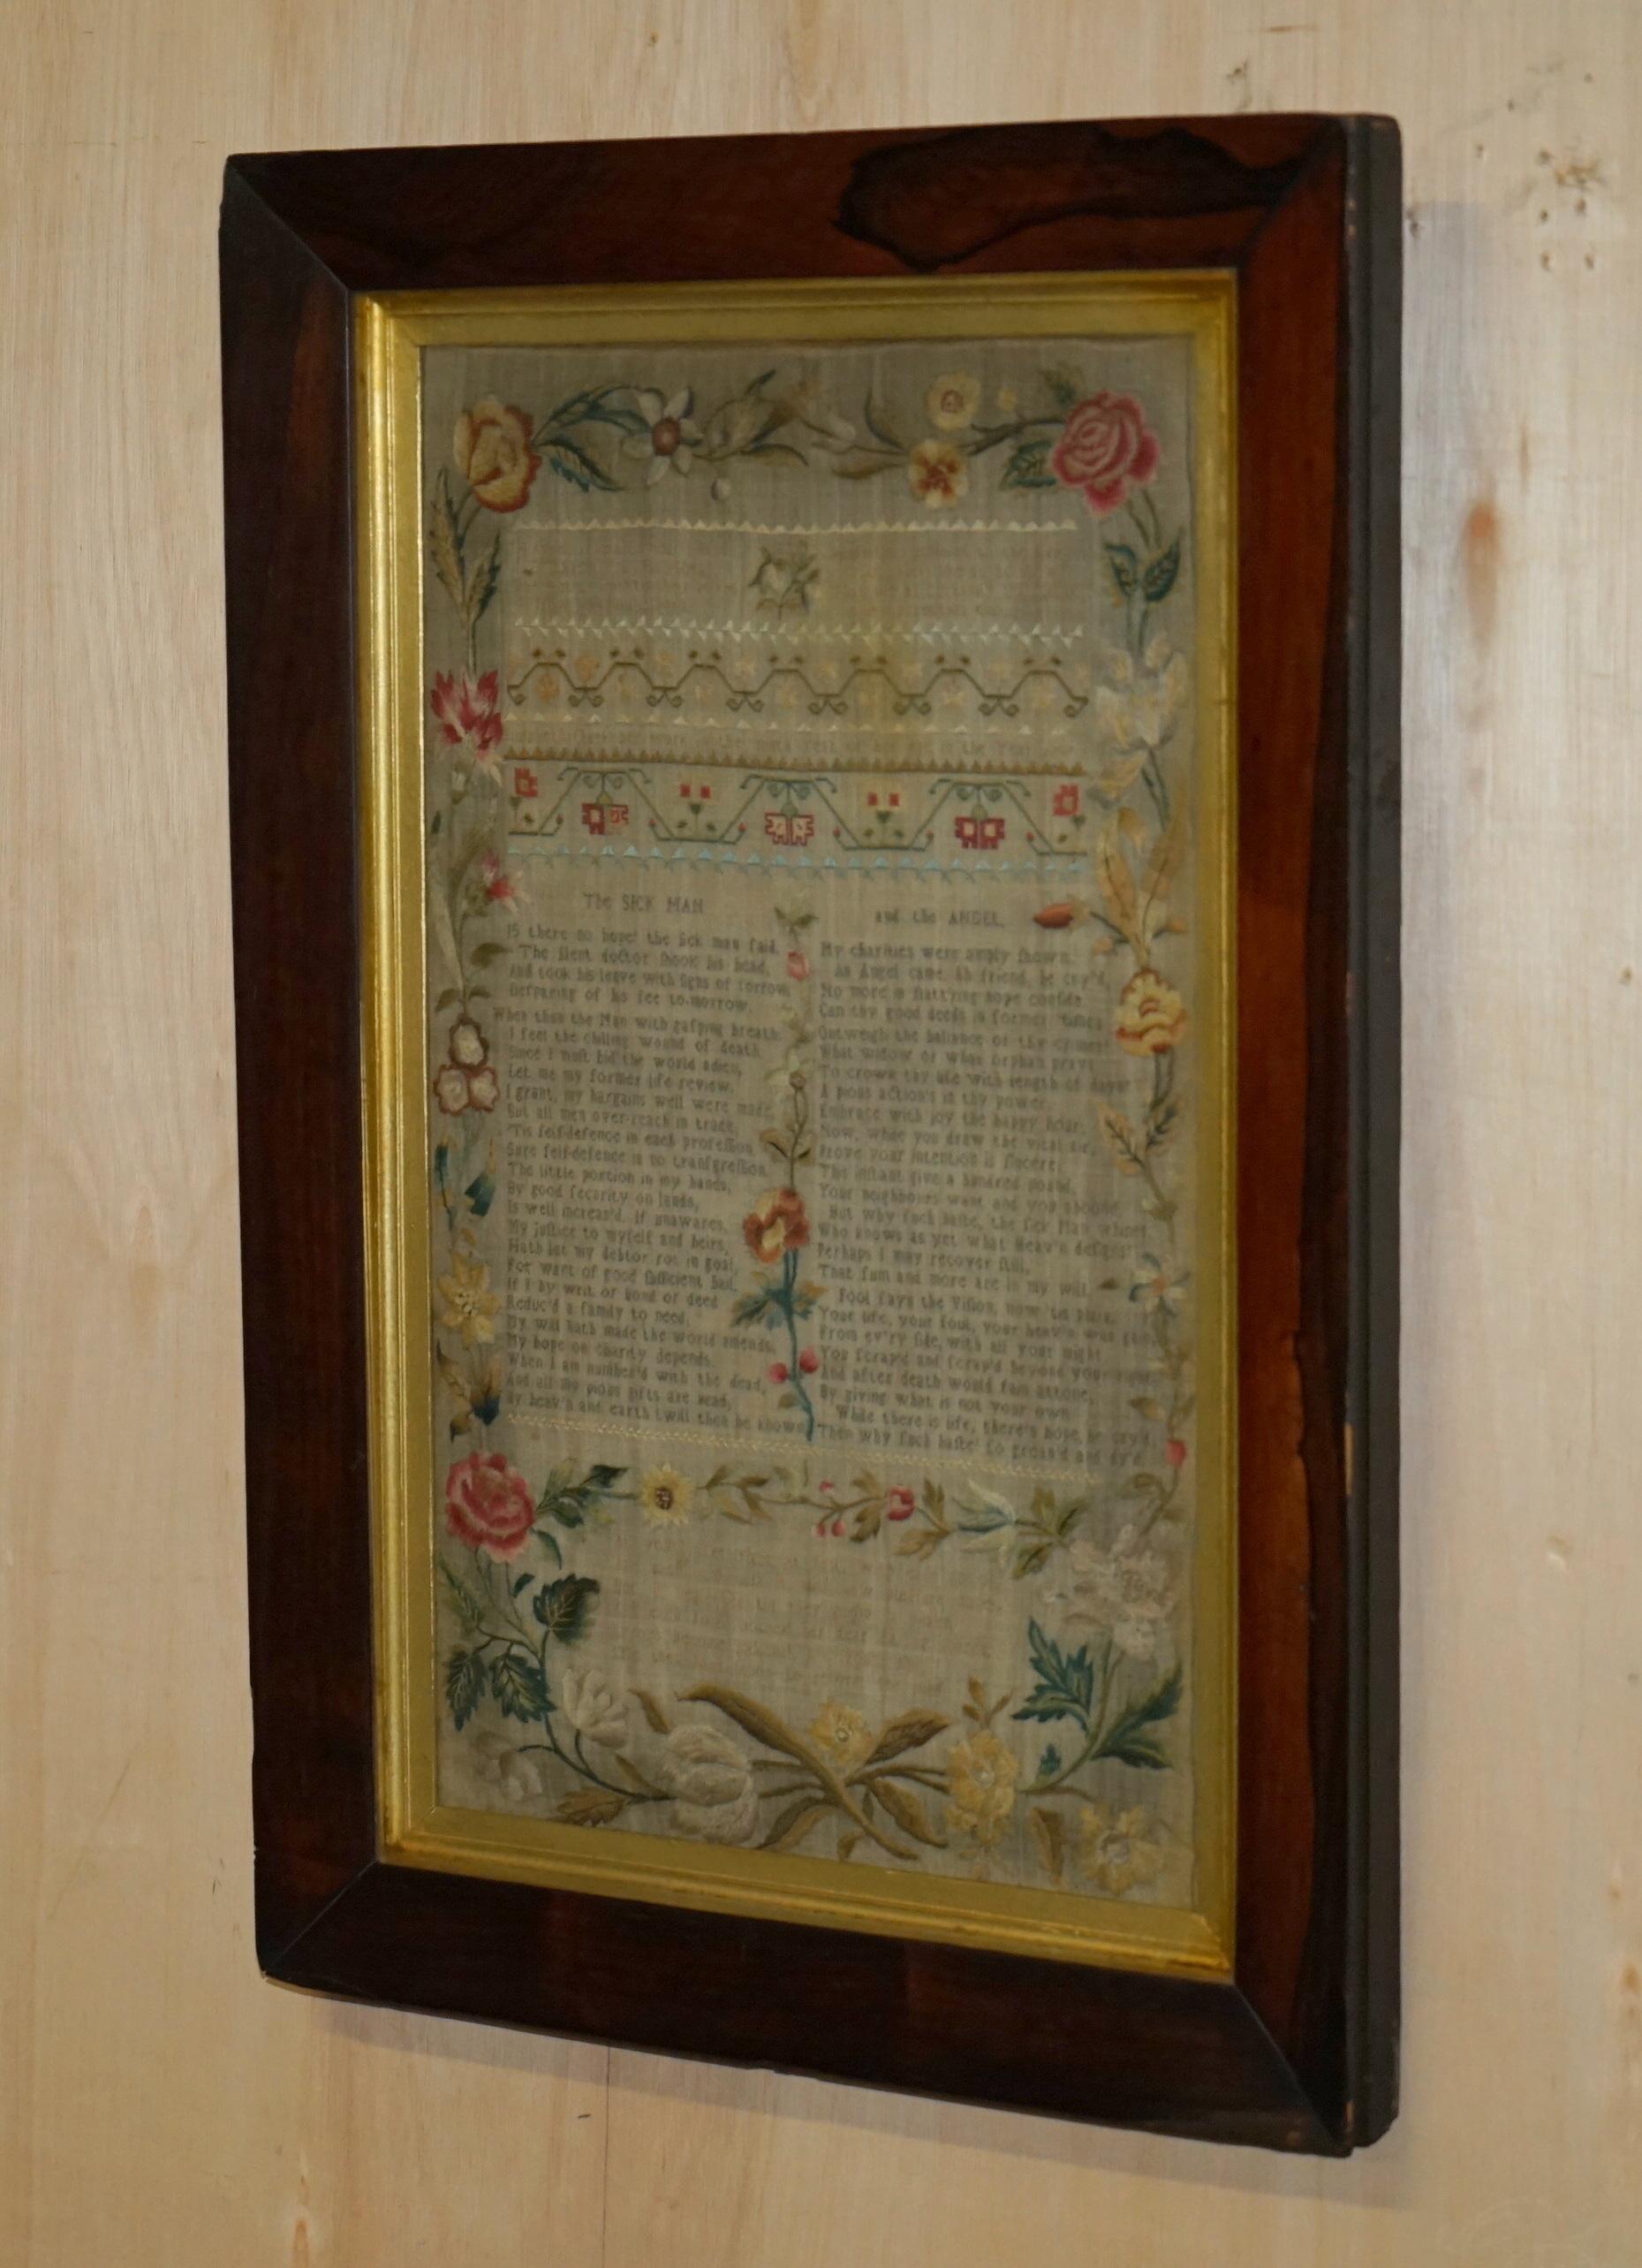 Royal House Antiques

Royal House Antiques is delighted to offer for sale this rather stunning, 1787 dated needlework sampler signed by Elizabeth Clark when she was nine years old 

I have four other versions of these samplers for sale, they are